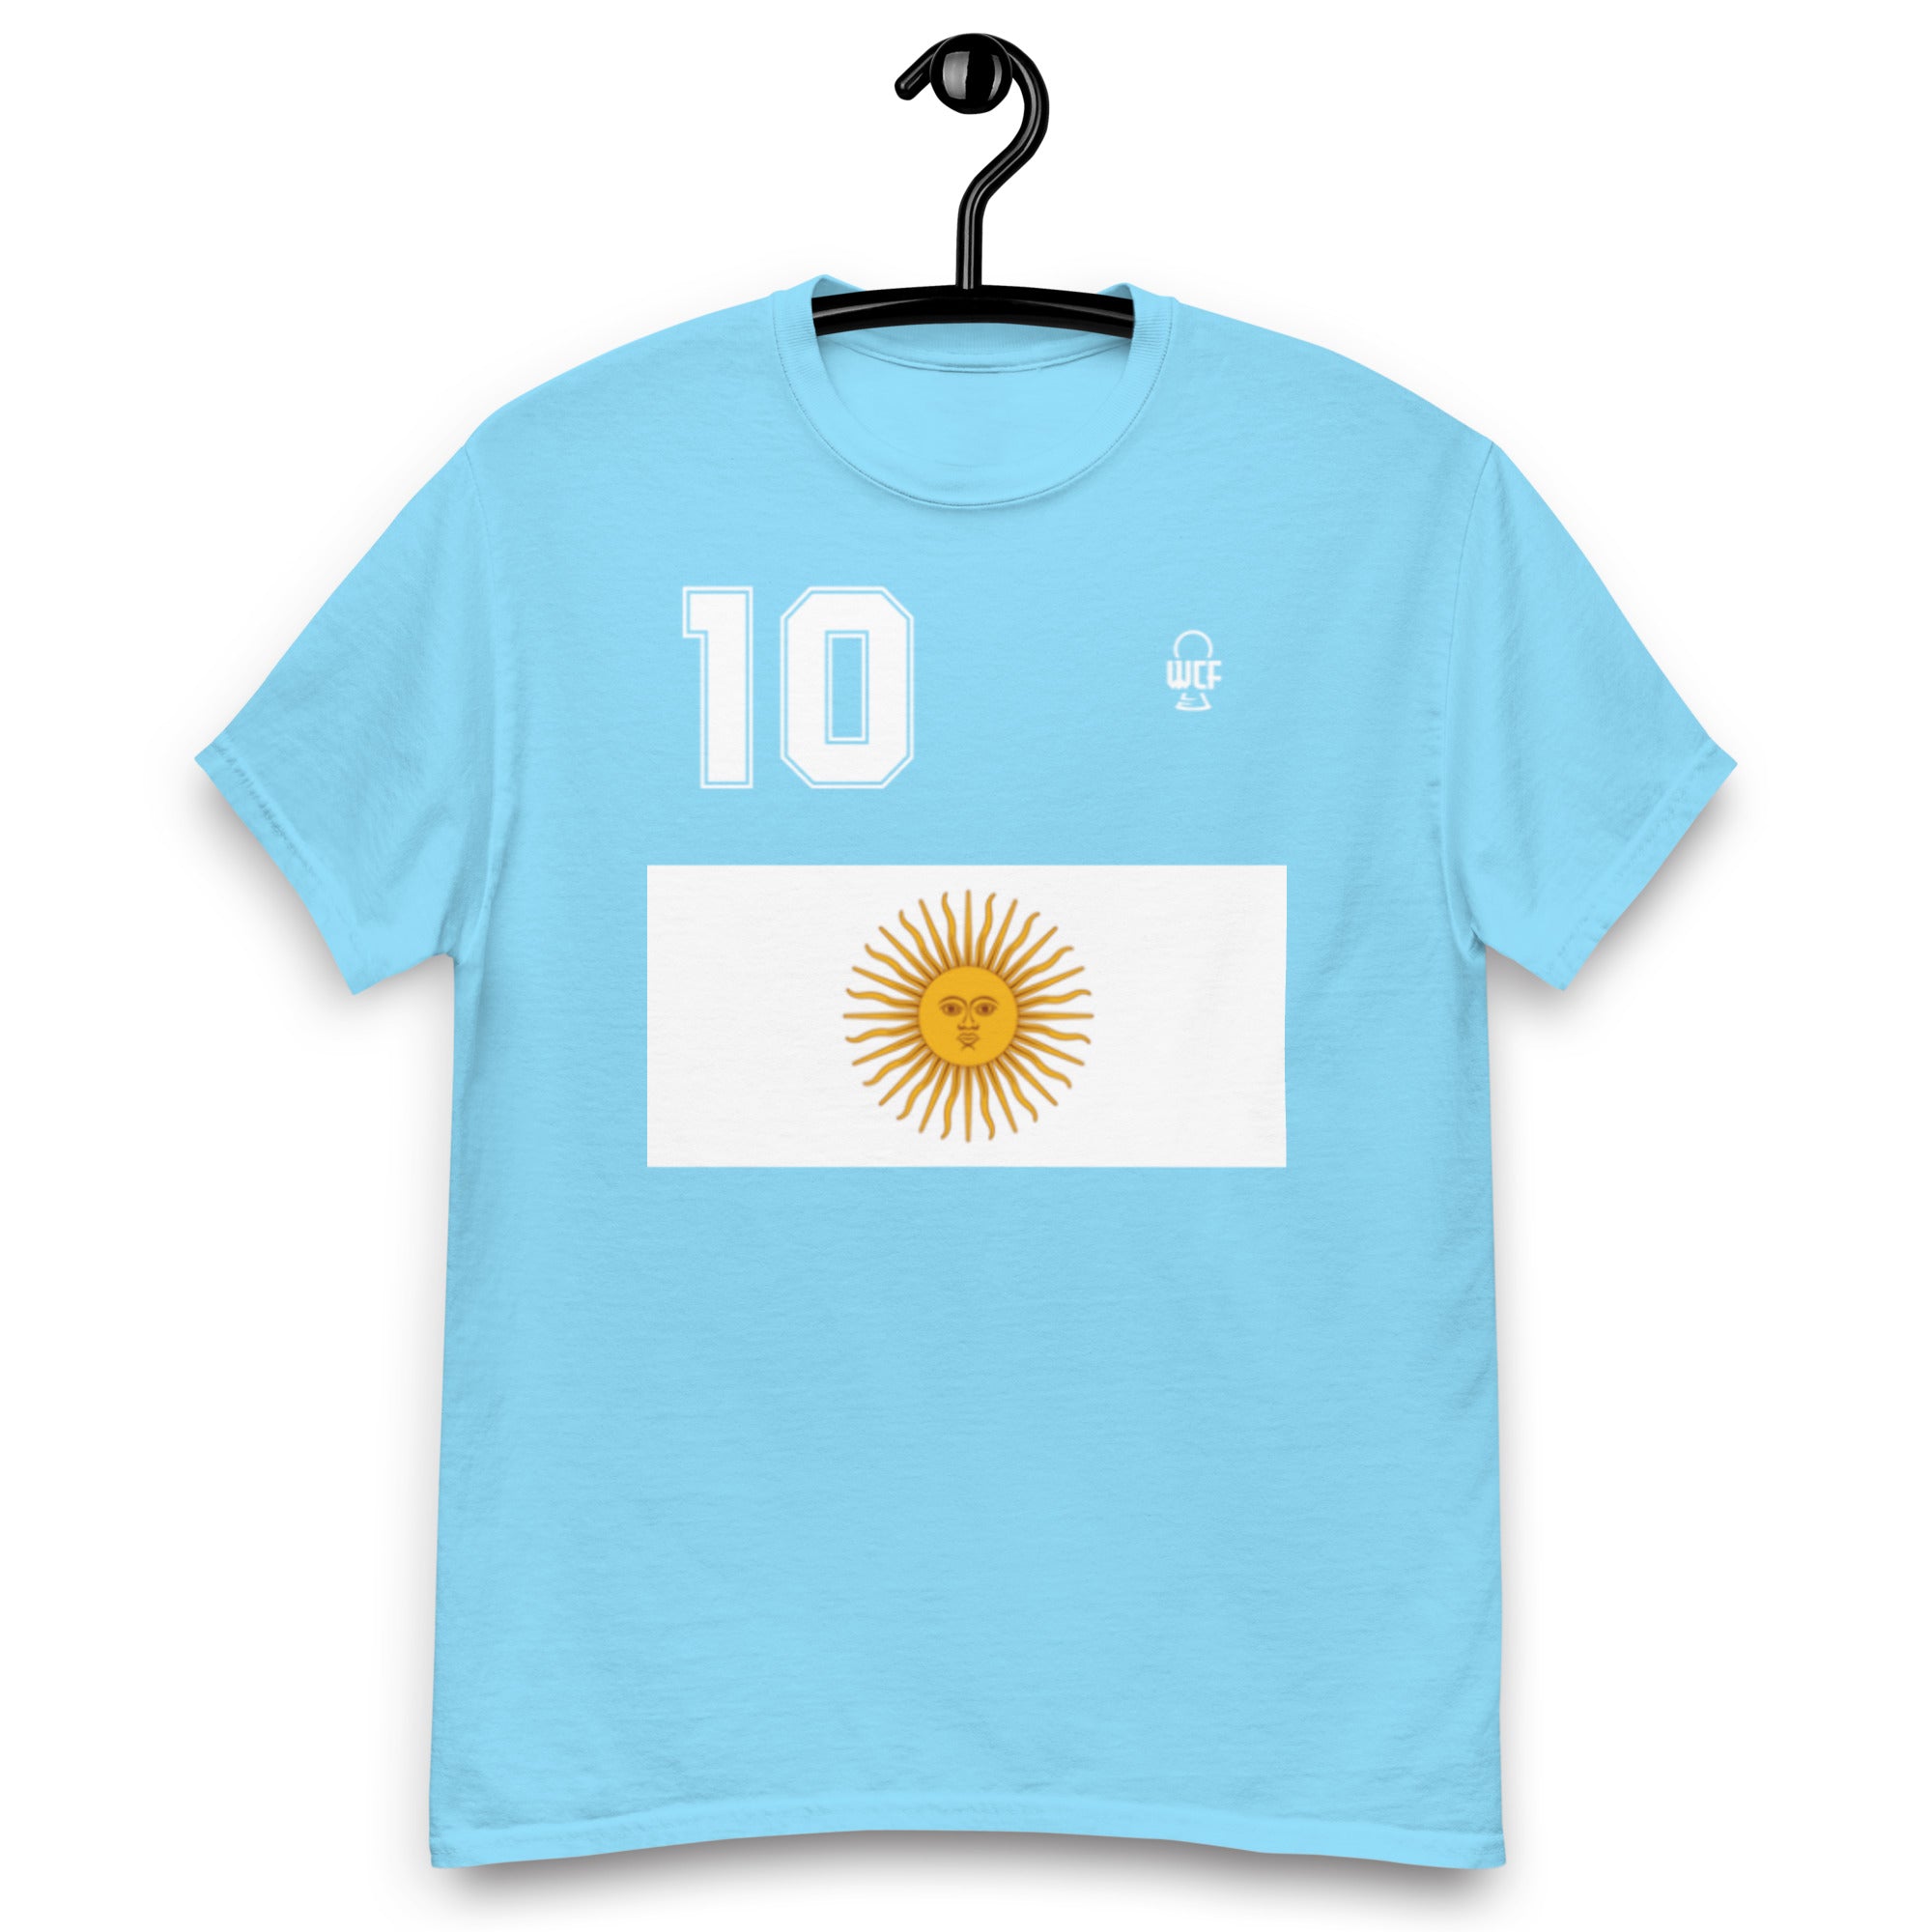 World Cup LEGENDS Classic T-Shirt - Diego - Argentina